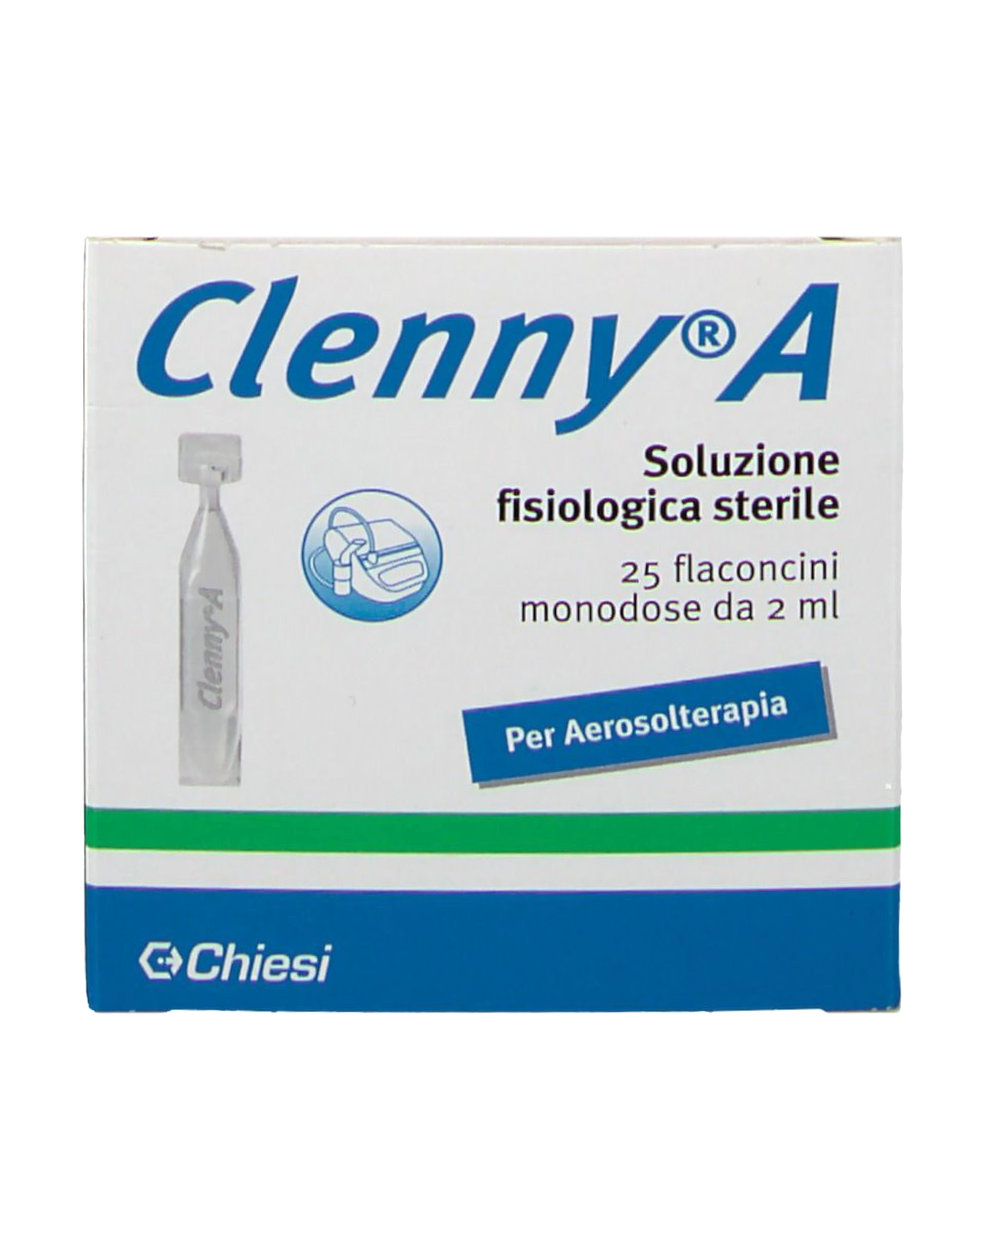 A - Soluzione Fisiologica Sterile by Clenny, 25 vials 